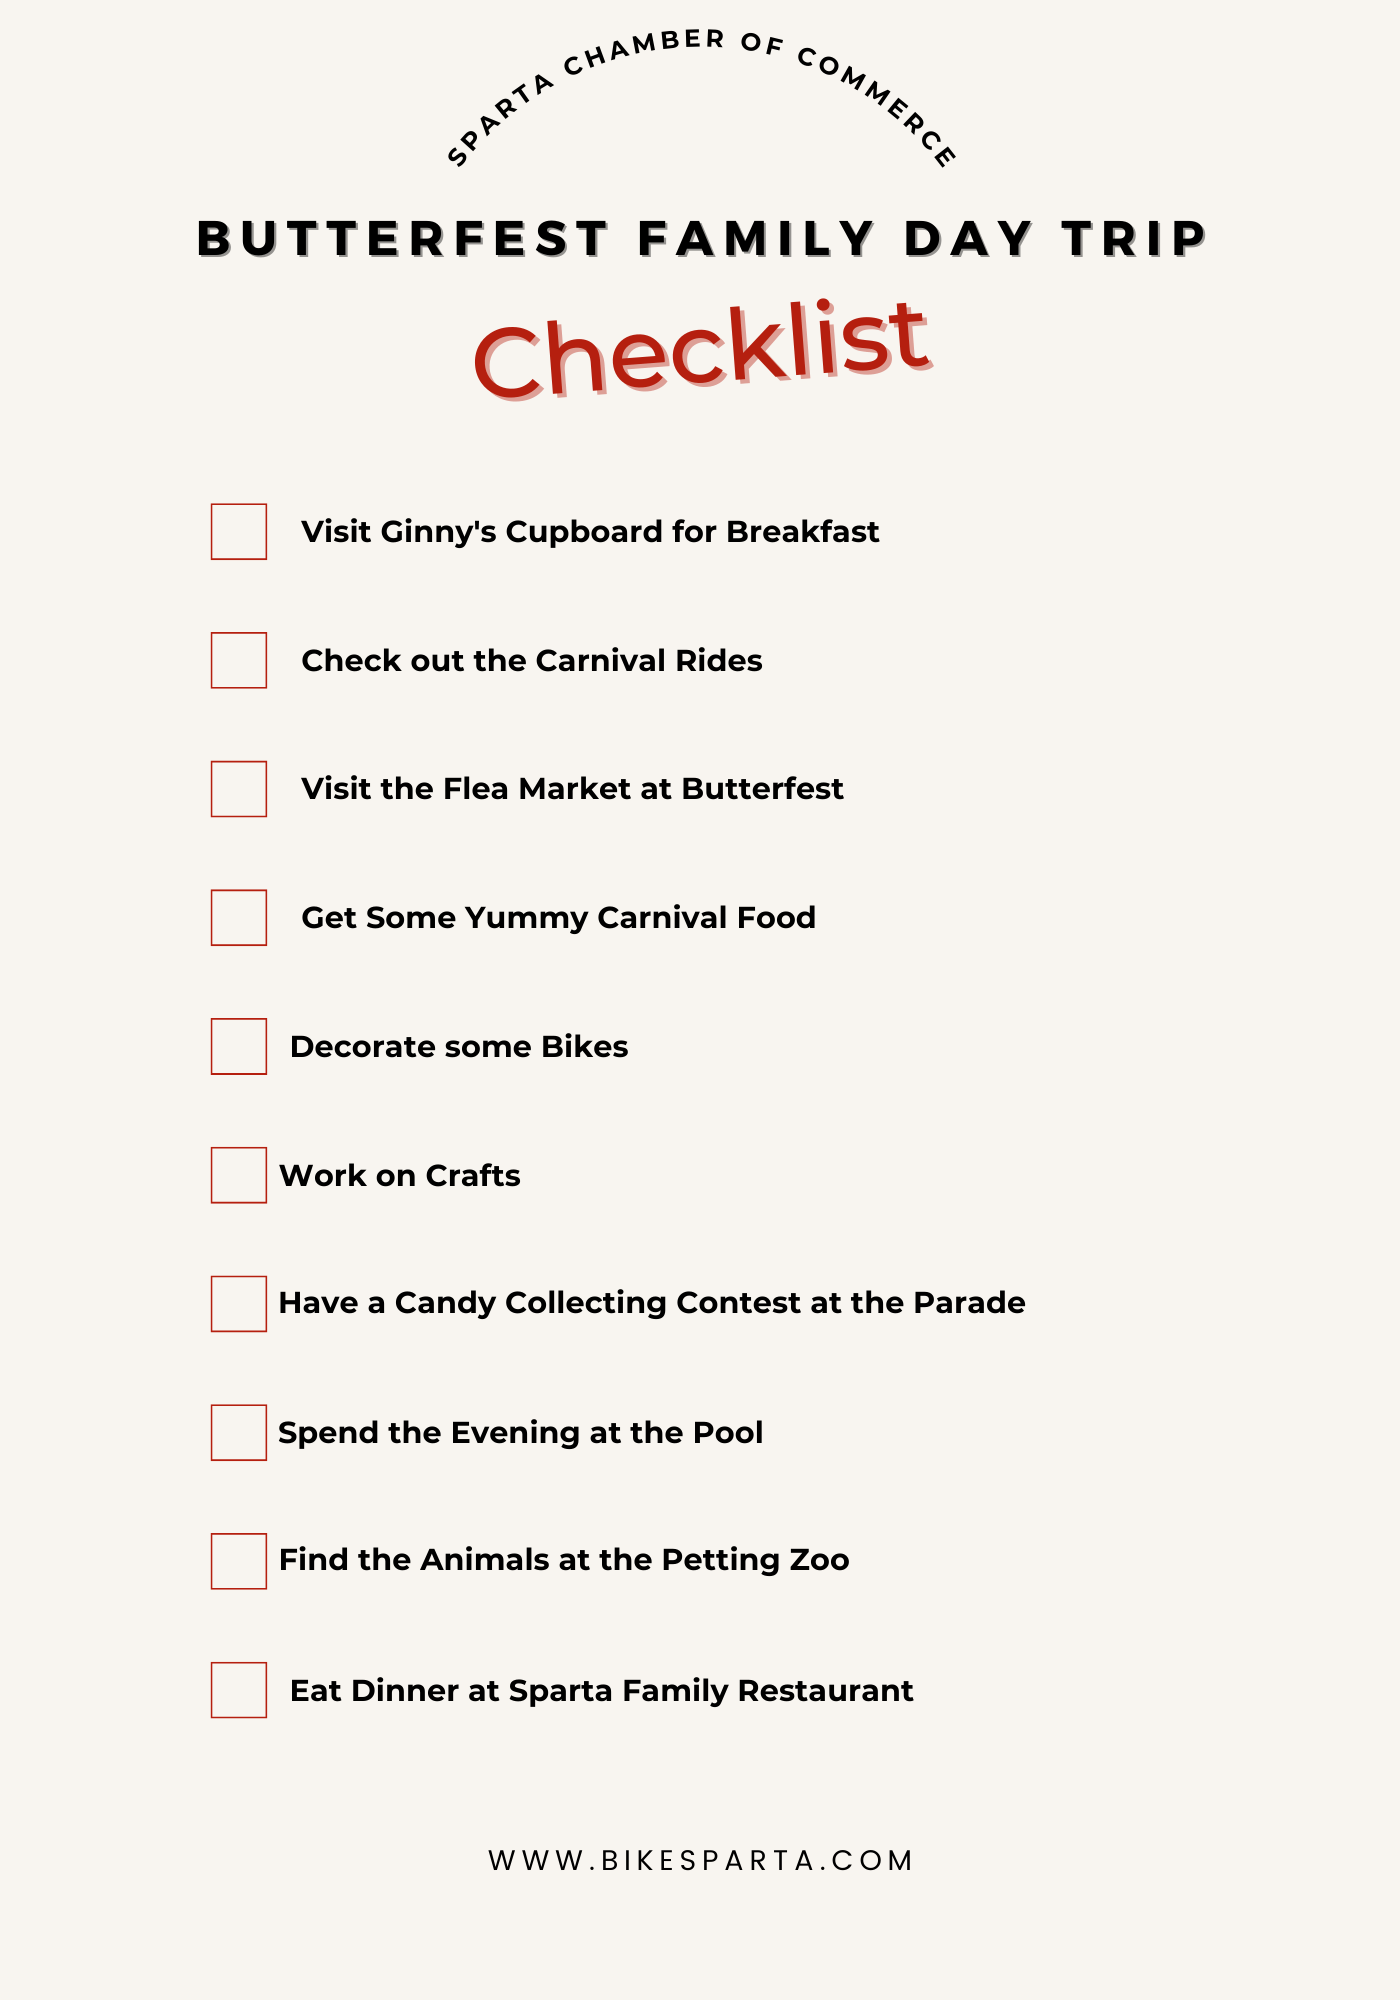 Butterfest Family Day Trip Checklist